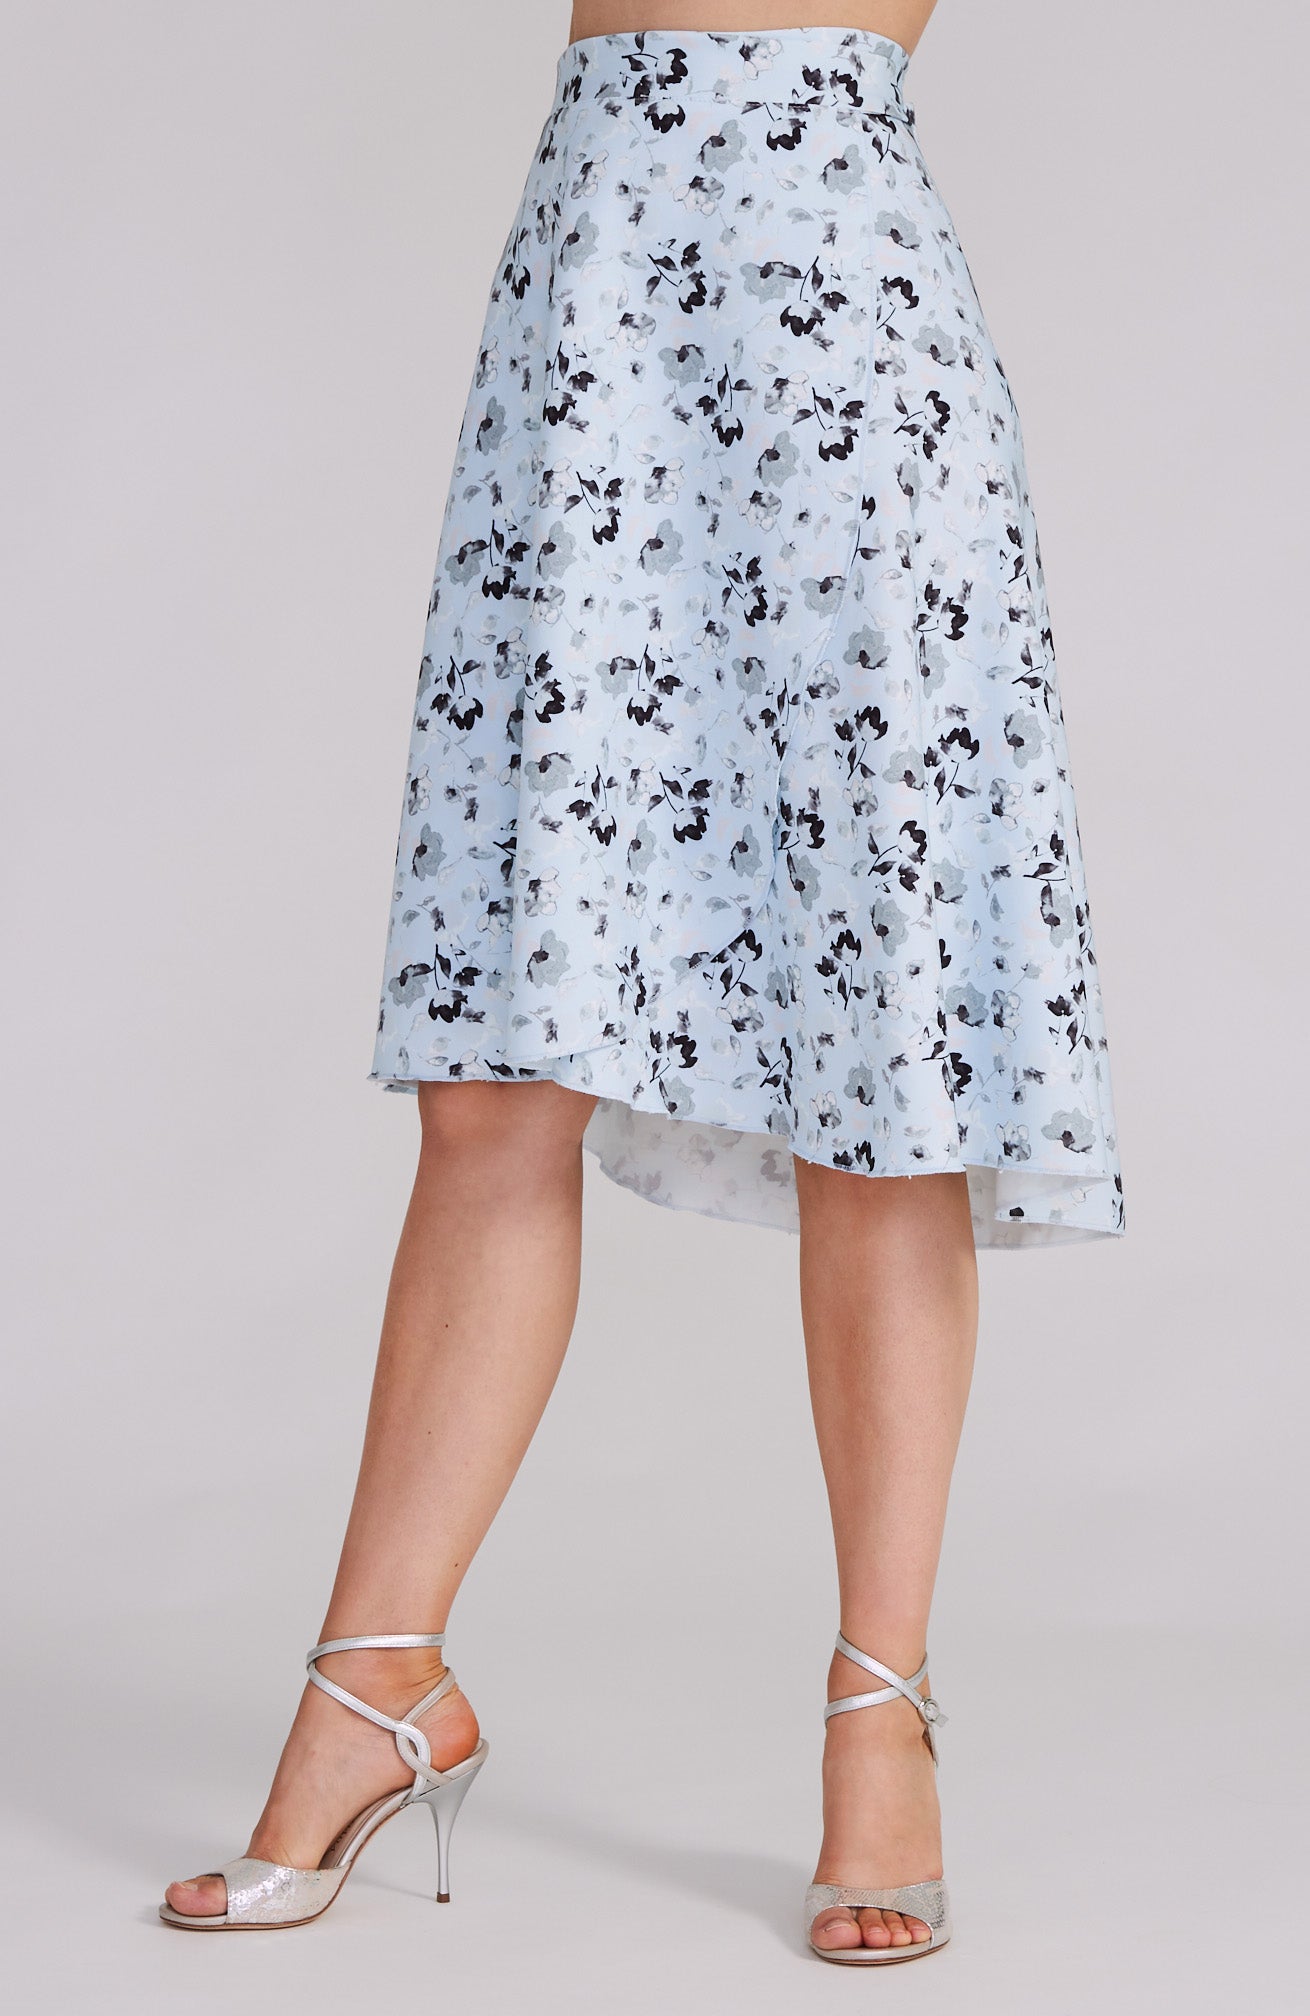 tango skirt in pale blue florals